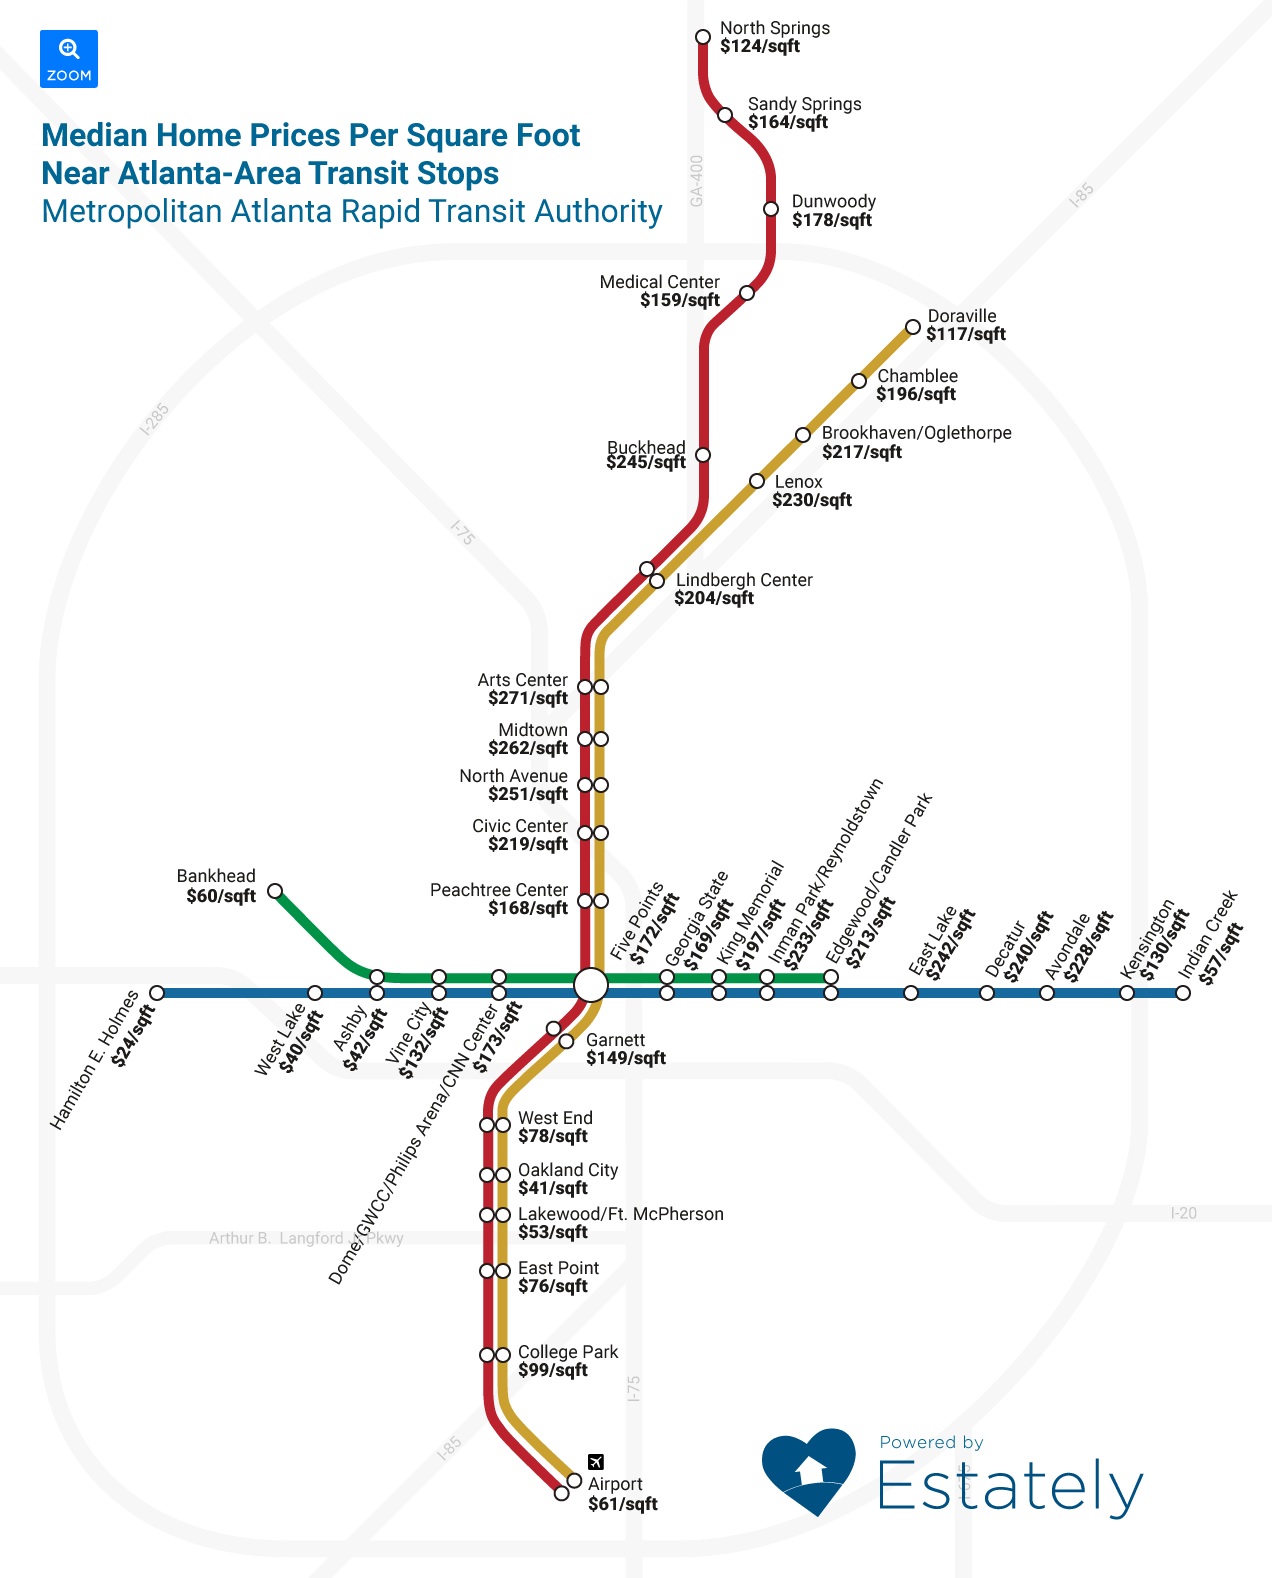 Atlanta Area Home Prices by Transit Stop